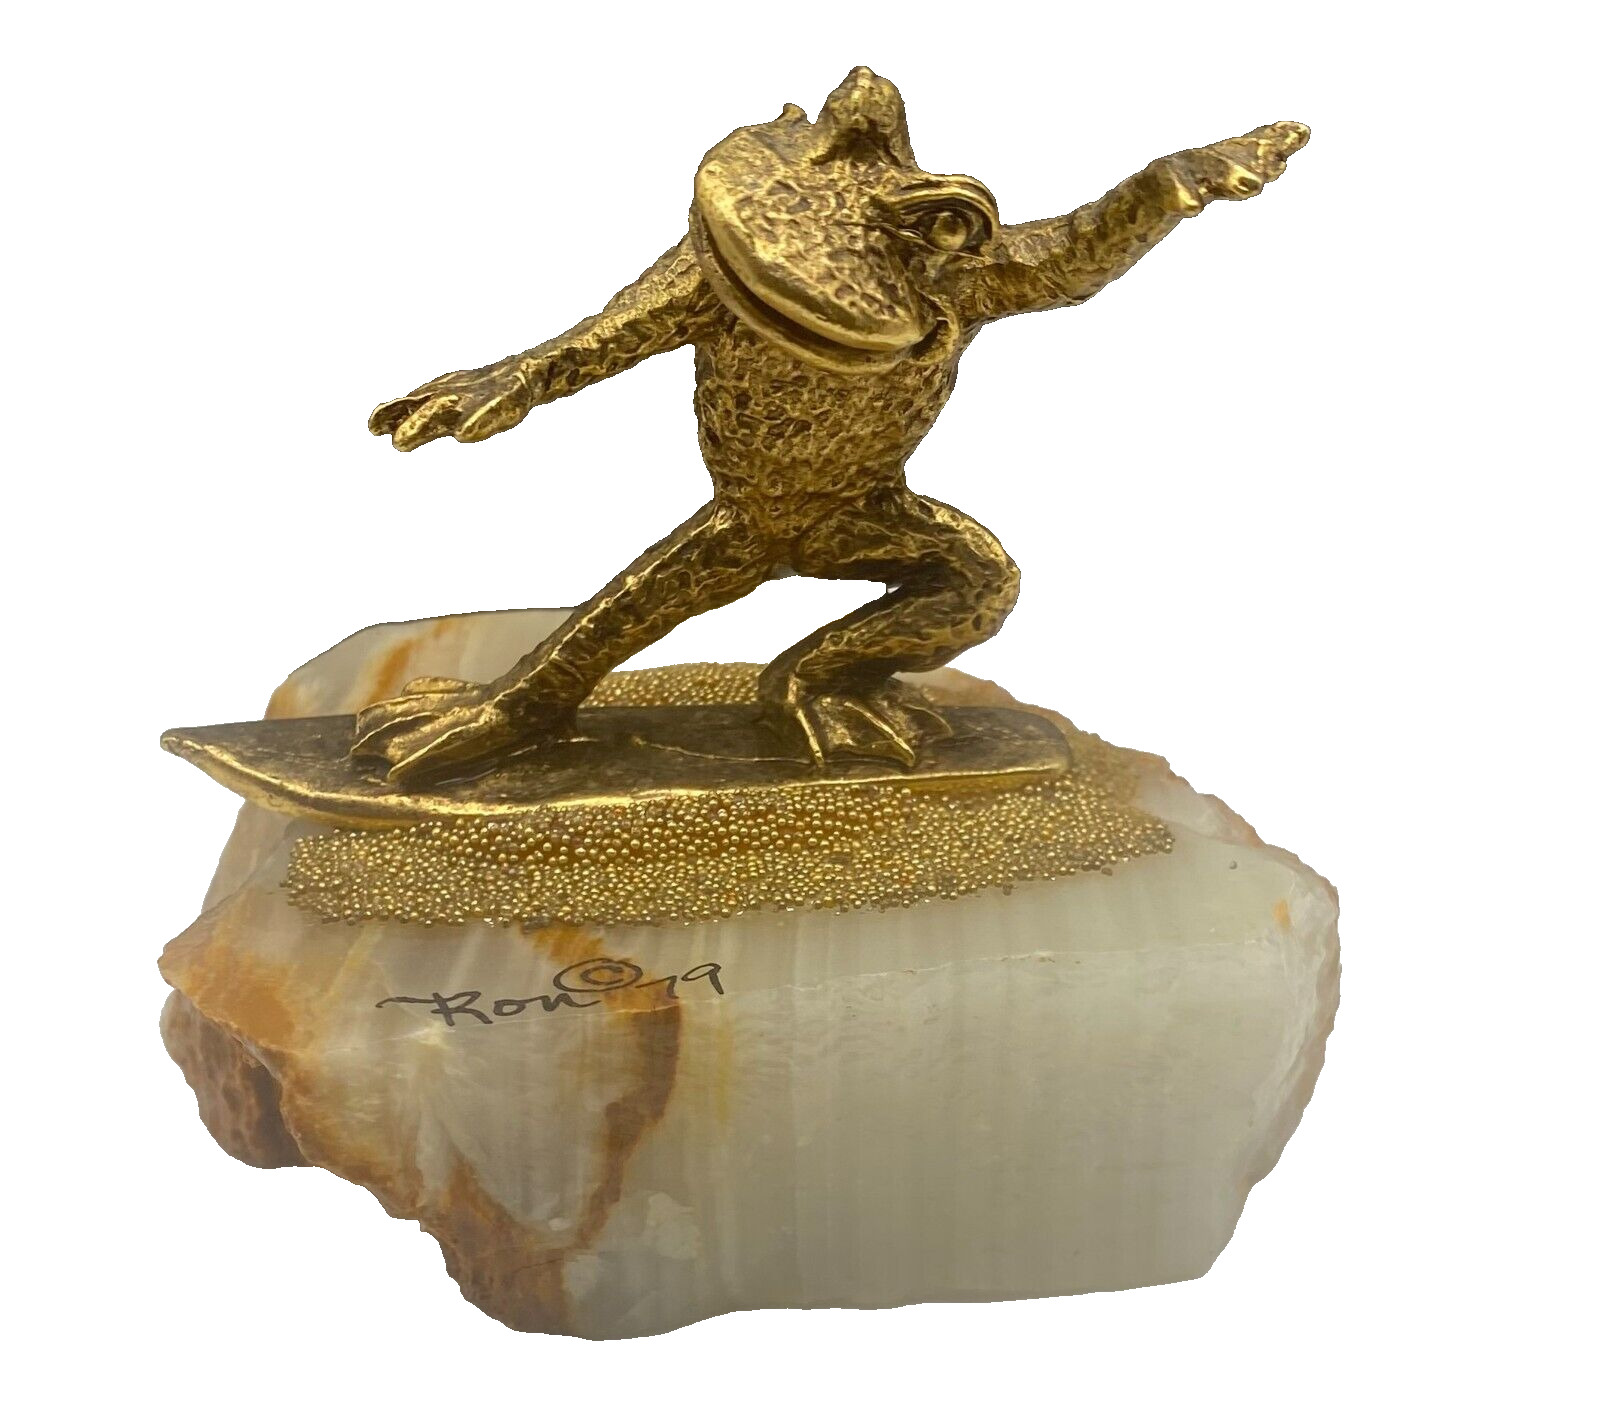 Special Edition Vintage Ron Lee 1979 Signed Surfing Frog Sculpture 24K Plated